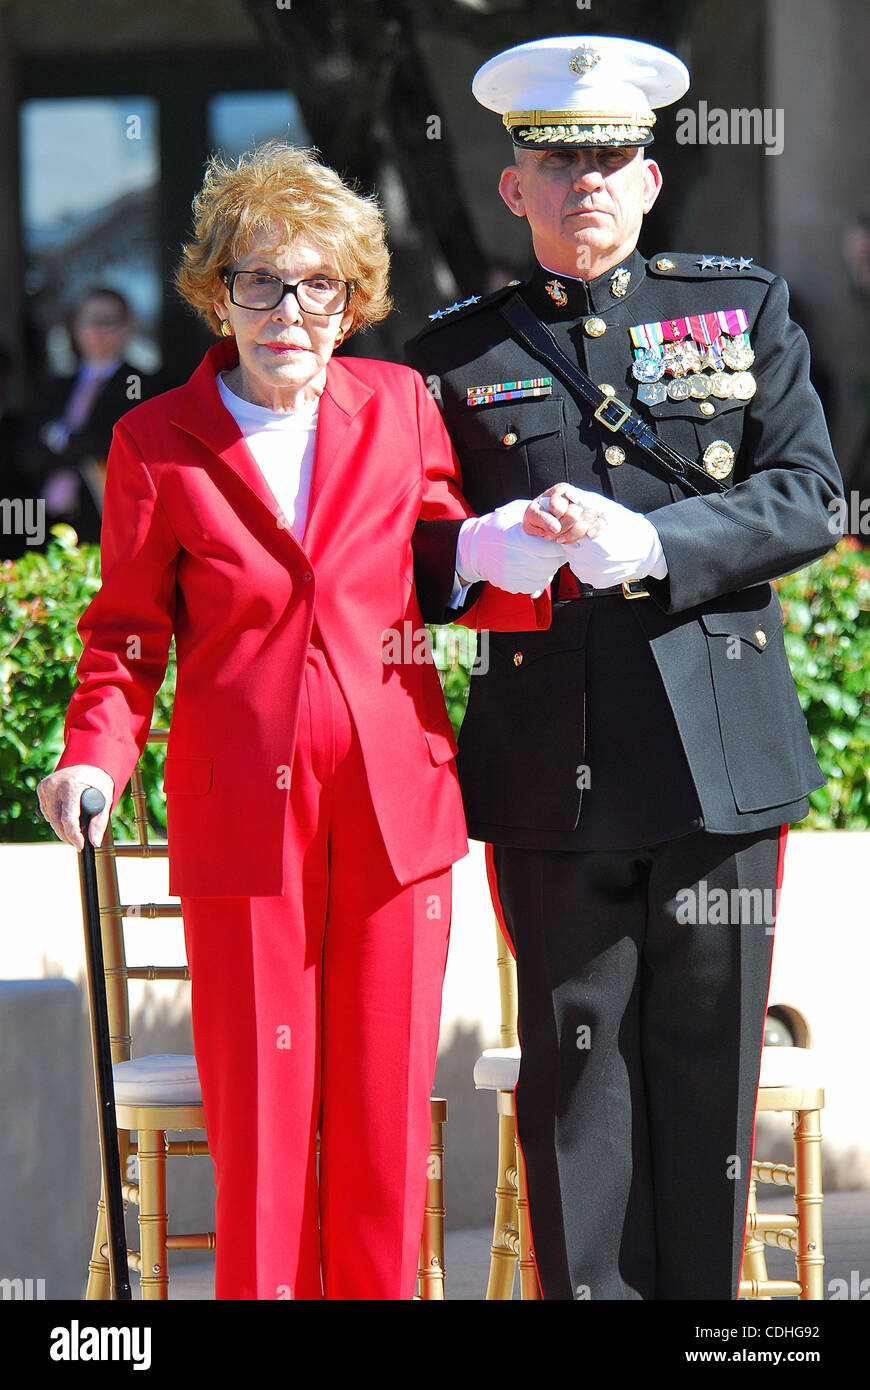 Feb. 6, 2011 - Simi Valley, California, U.S. - Former US first lady NANCY REAGAN is escorted by Marine Corps Lieutenant General GEORGE J. FLYNN as she arrives at the memorial site which serves as her husband's final resting place to lay a wreath during the centennial birthday celebration for former  Stock Photo